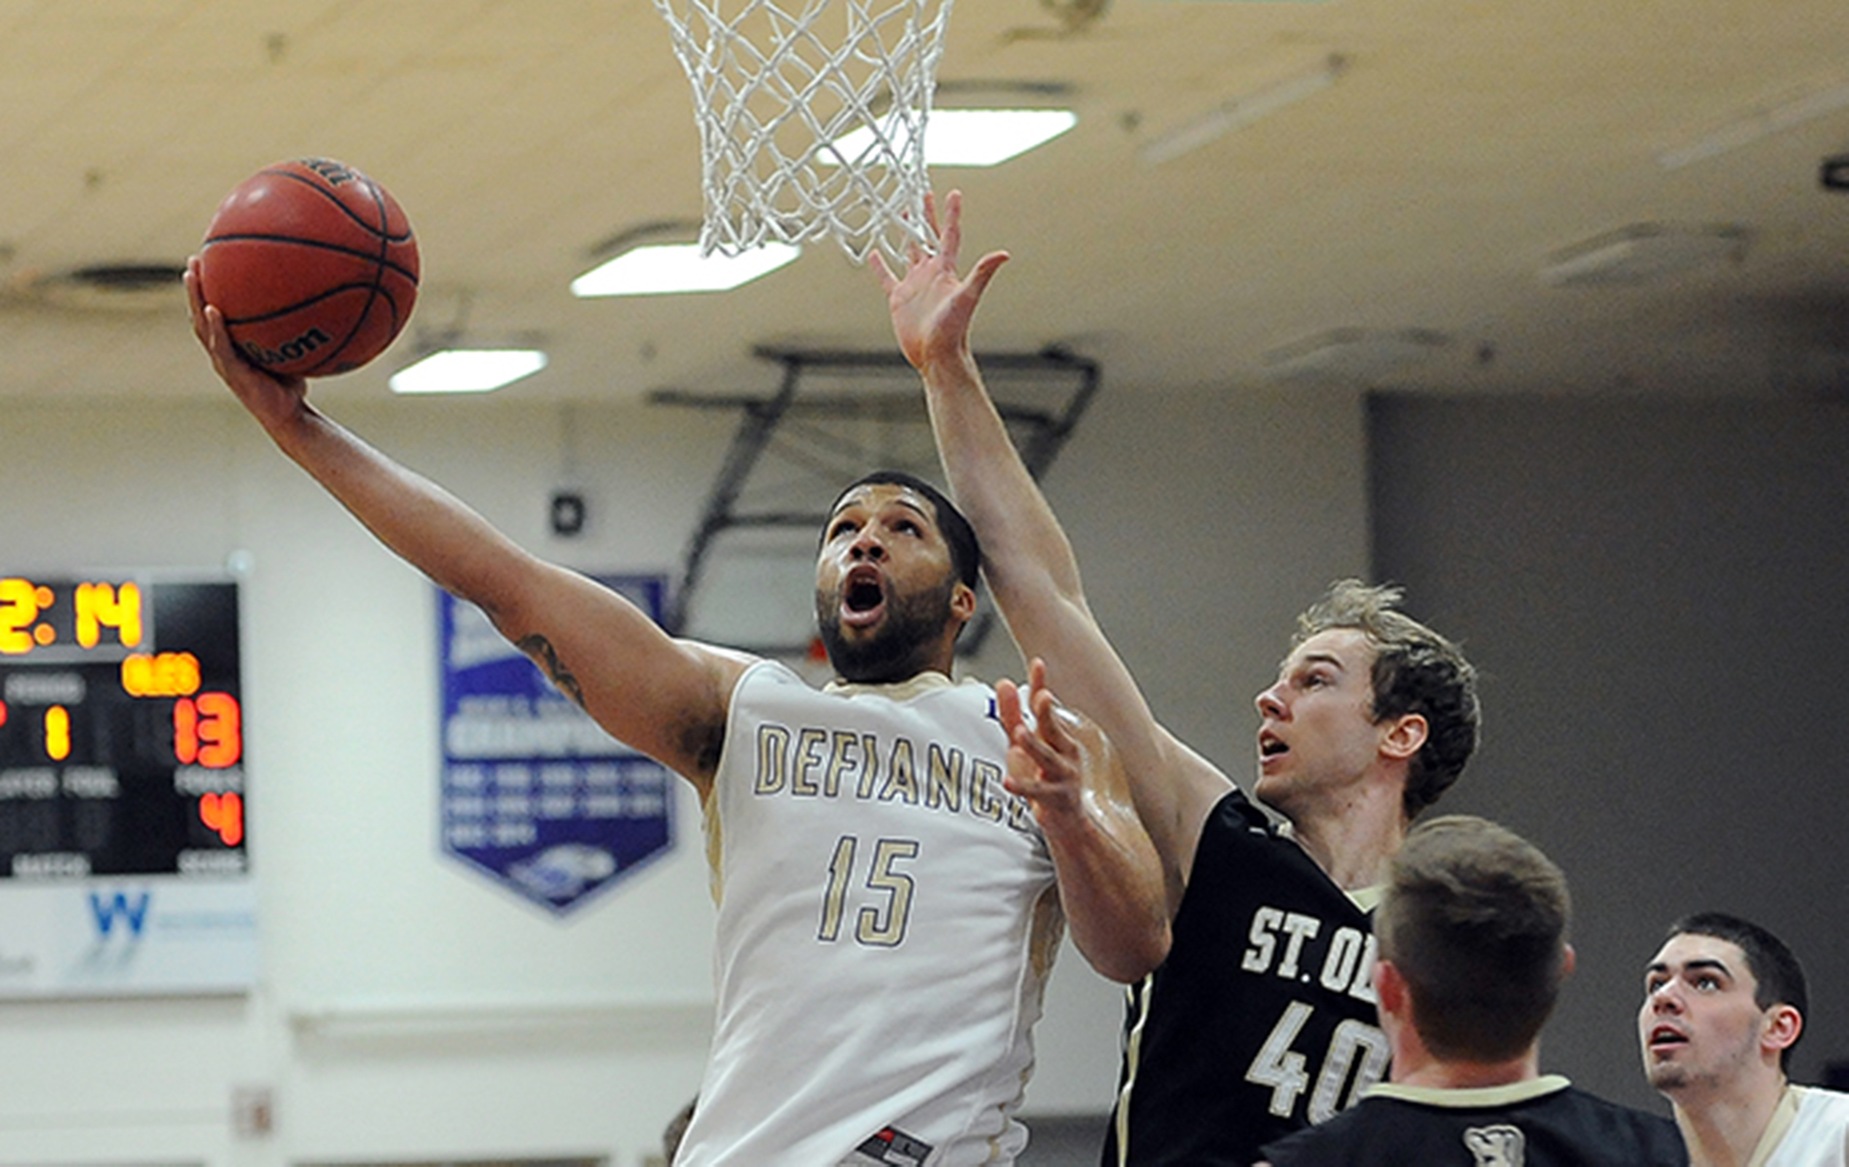 Men's Hoops Season Ends With Loss to No. 24 St. Olaf